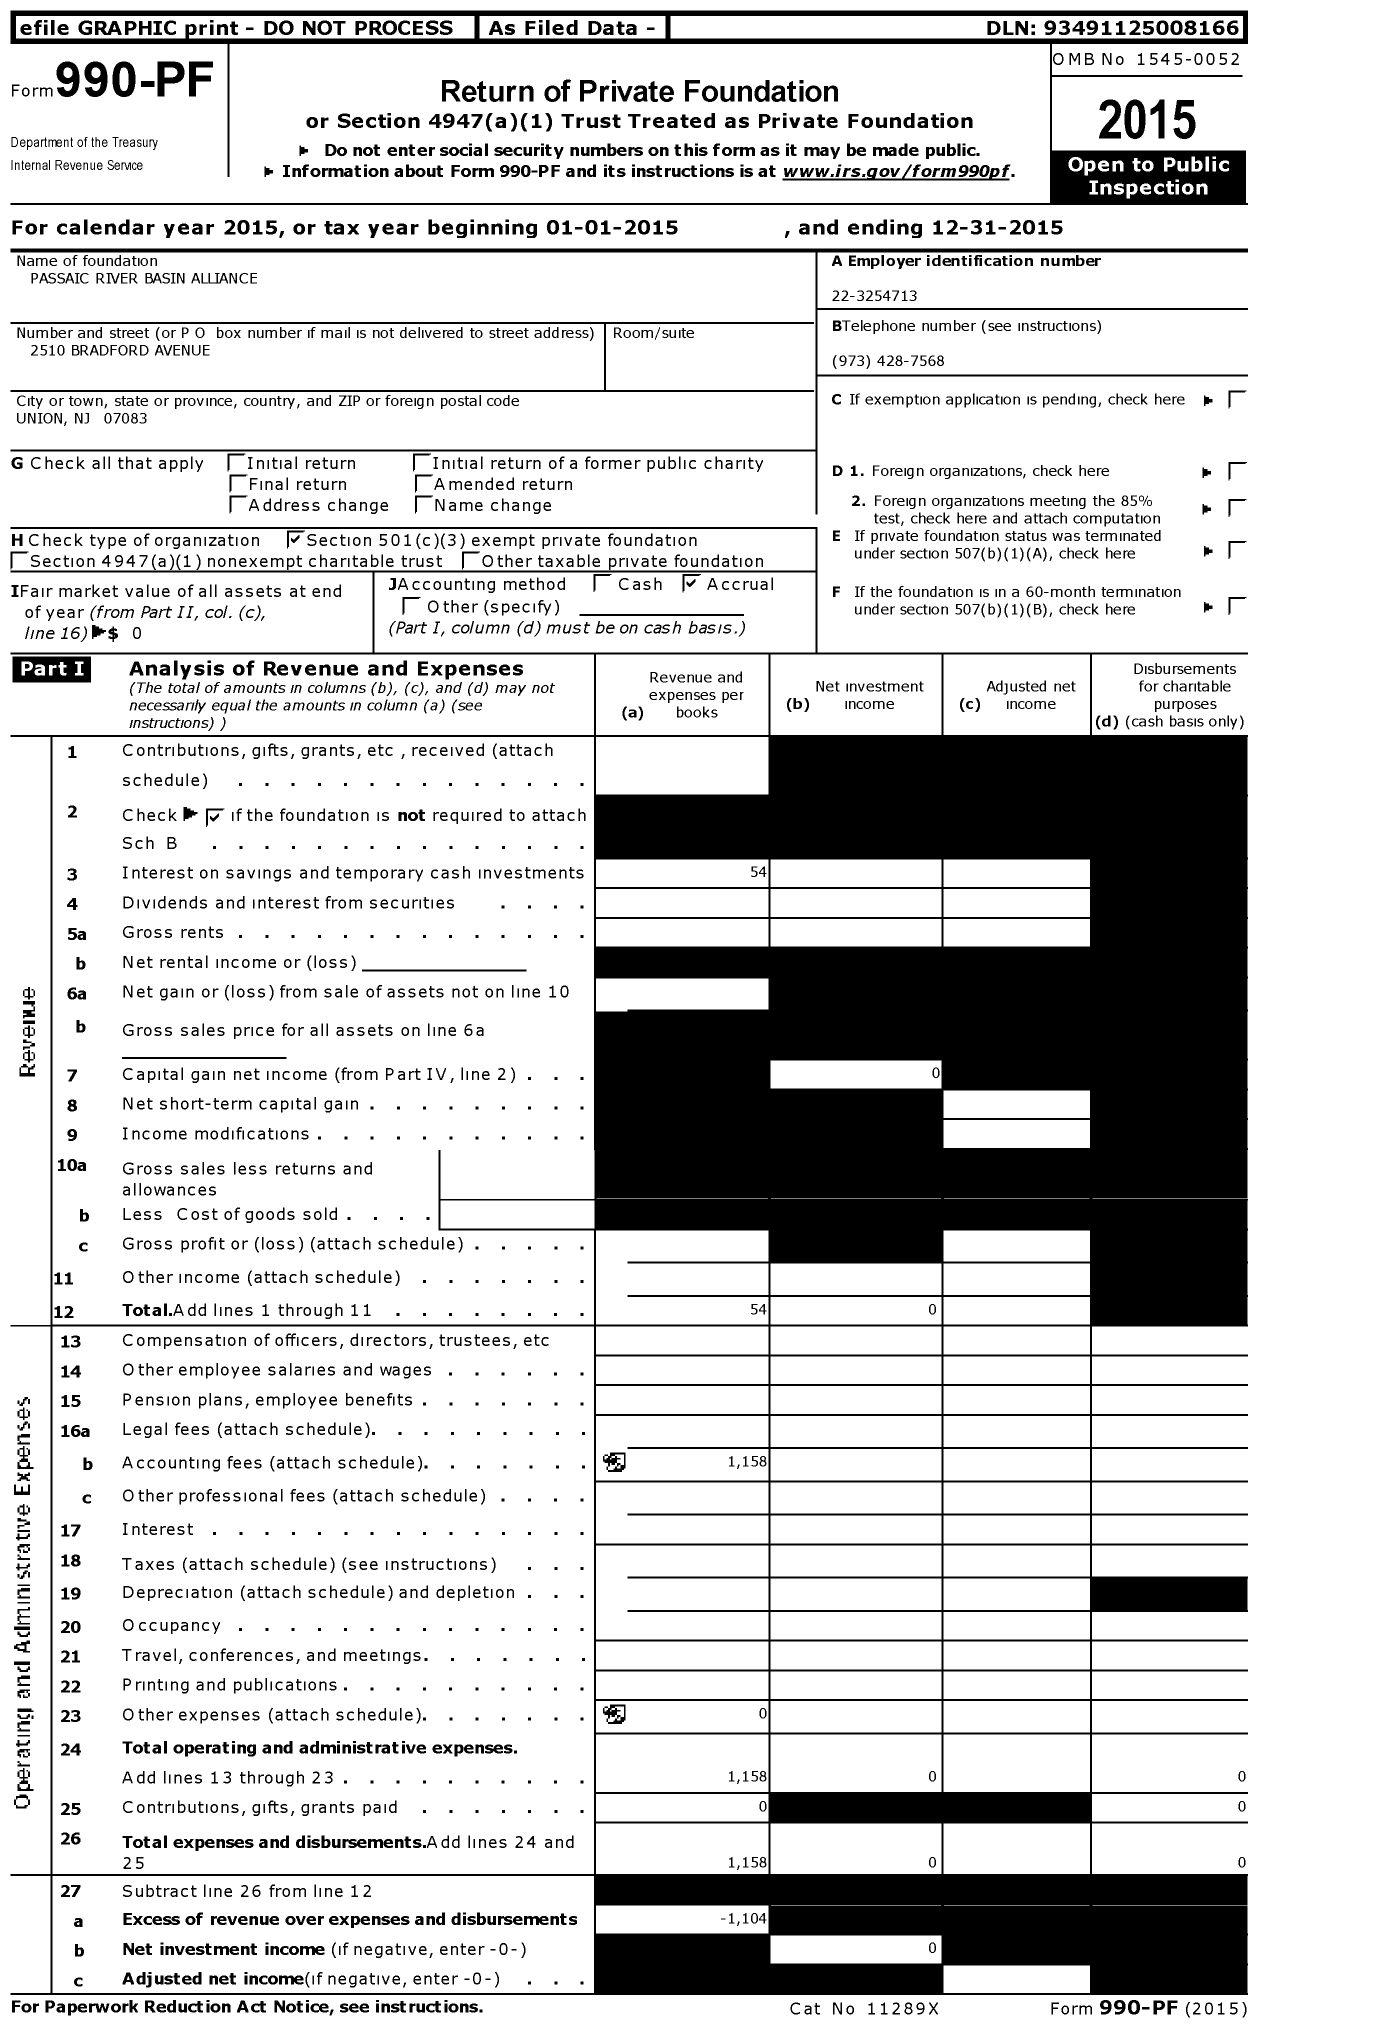 Image of first page of 2015 Form 990PF for Passaic River Basin Alliance